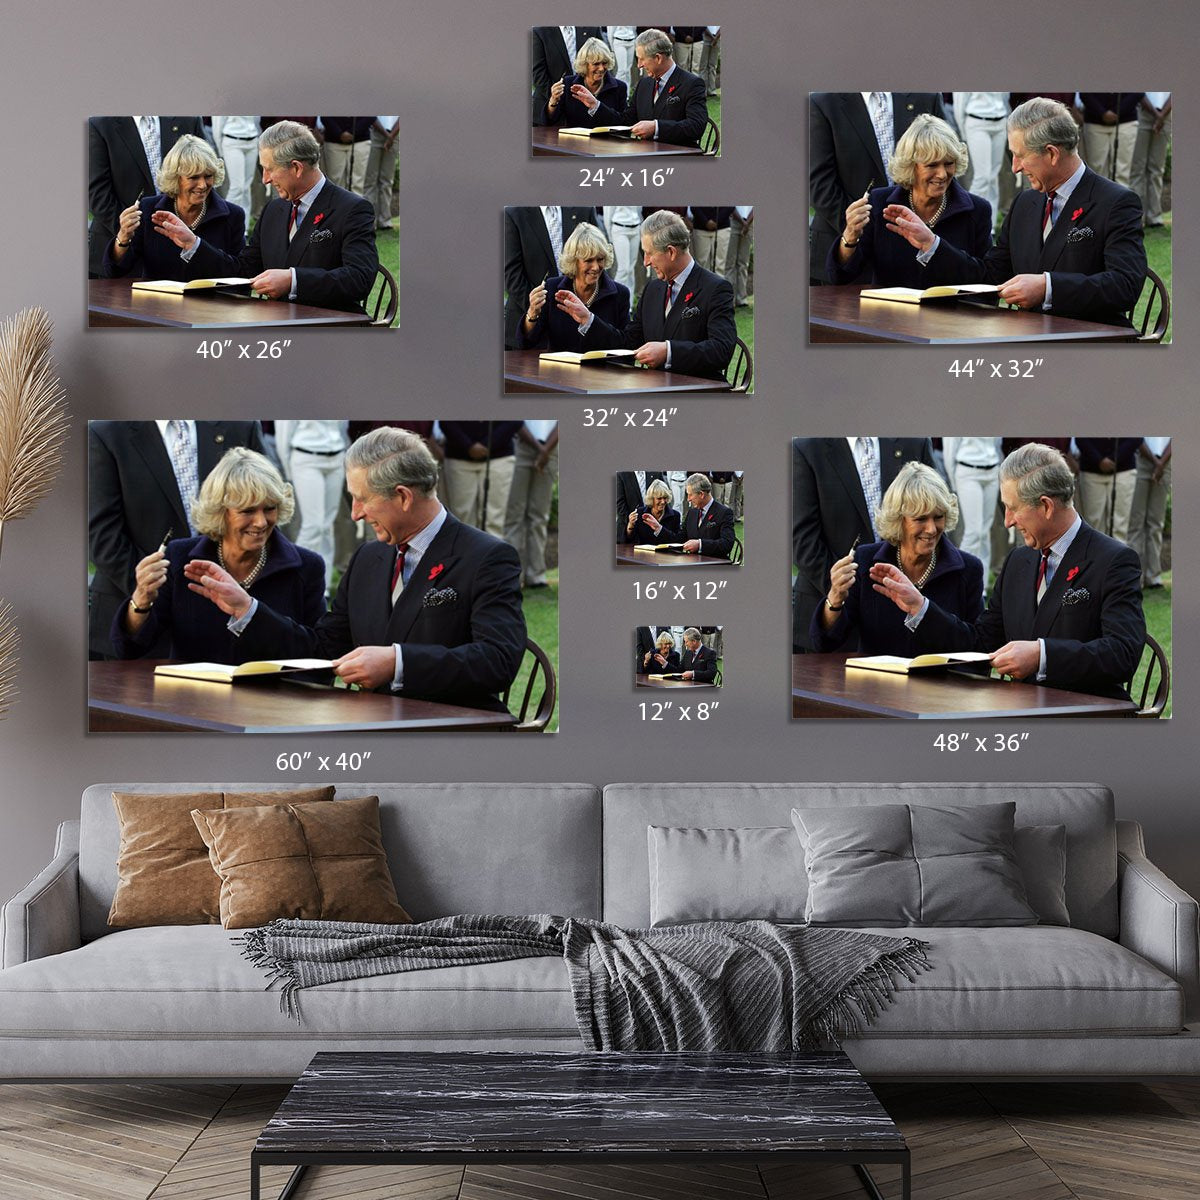 Prince Charles with Camilla in Washington DC Canvas Print or Poster